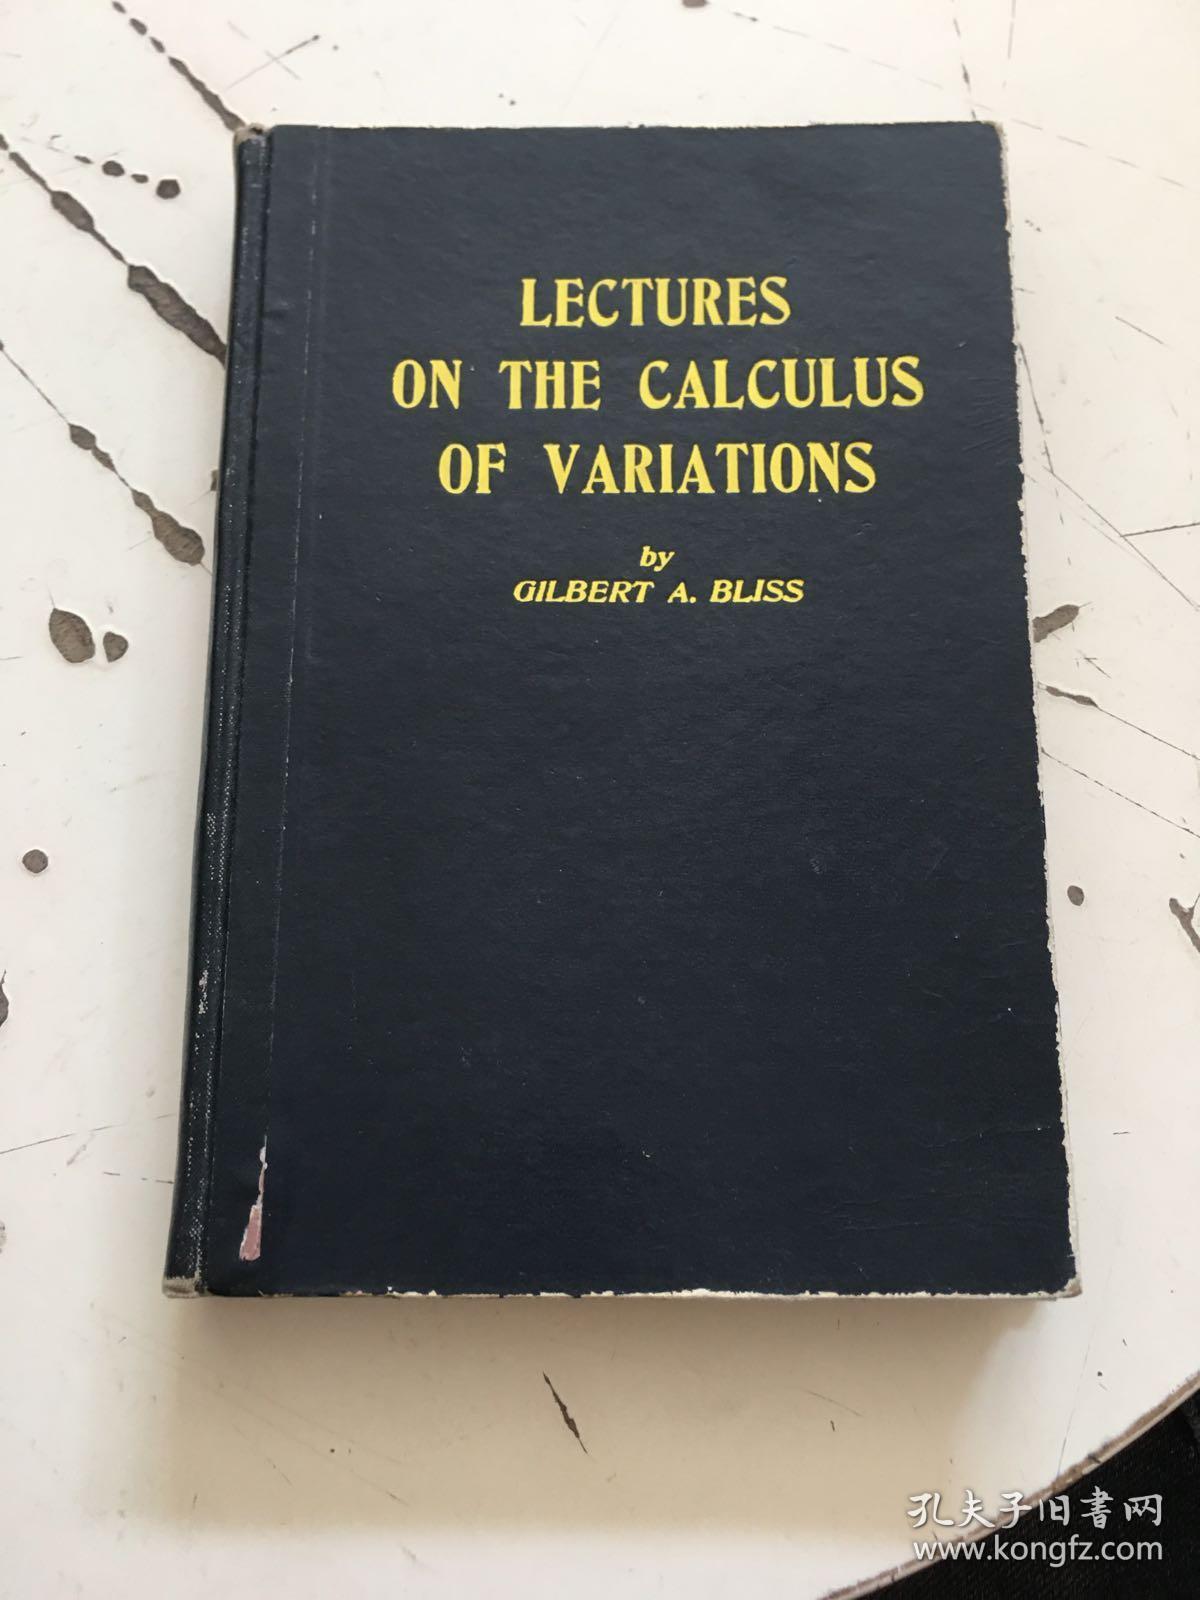 LECTURES ON THE CALCULUS OF VARIATIONS变分学讲义（英文）精装，北京工业学院藏书